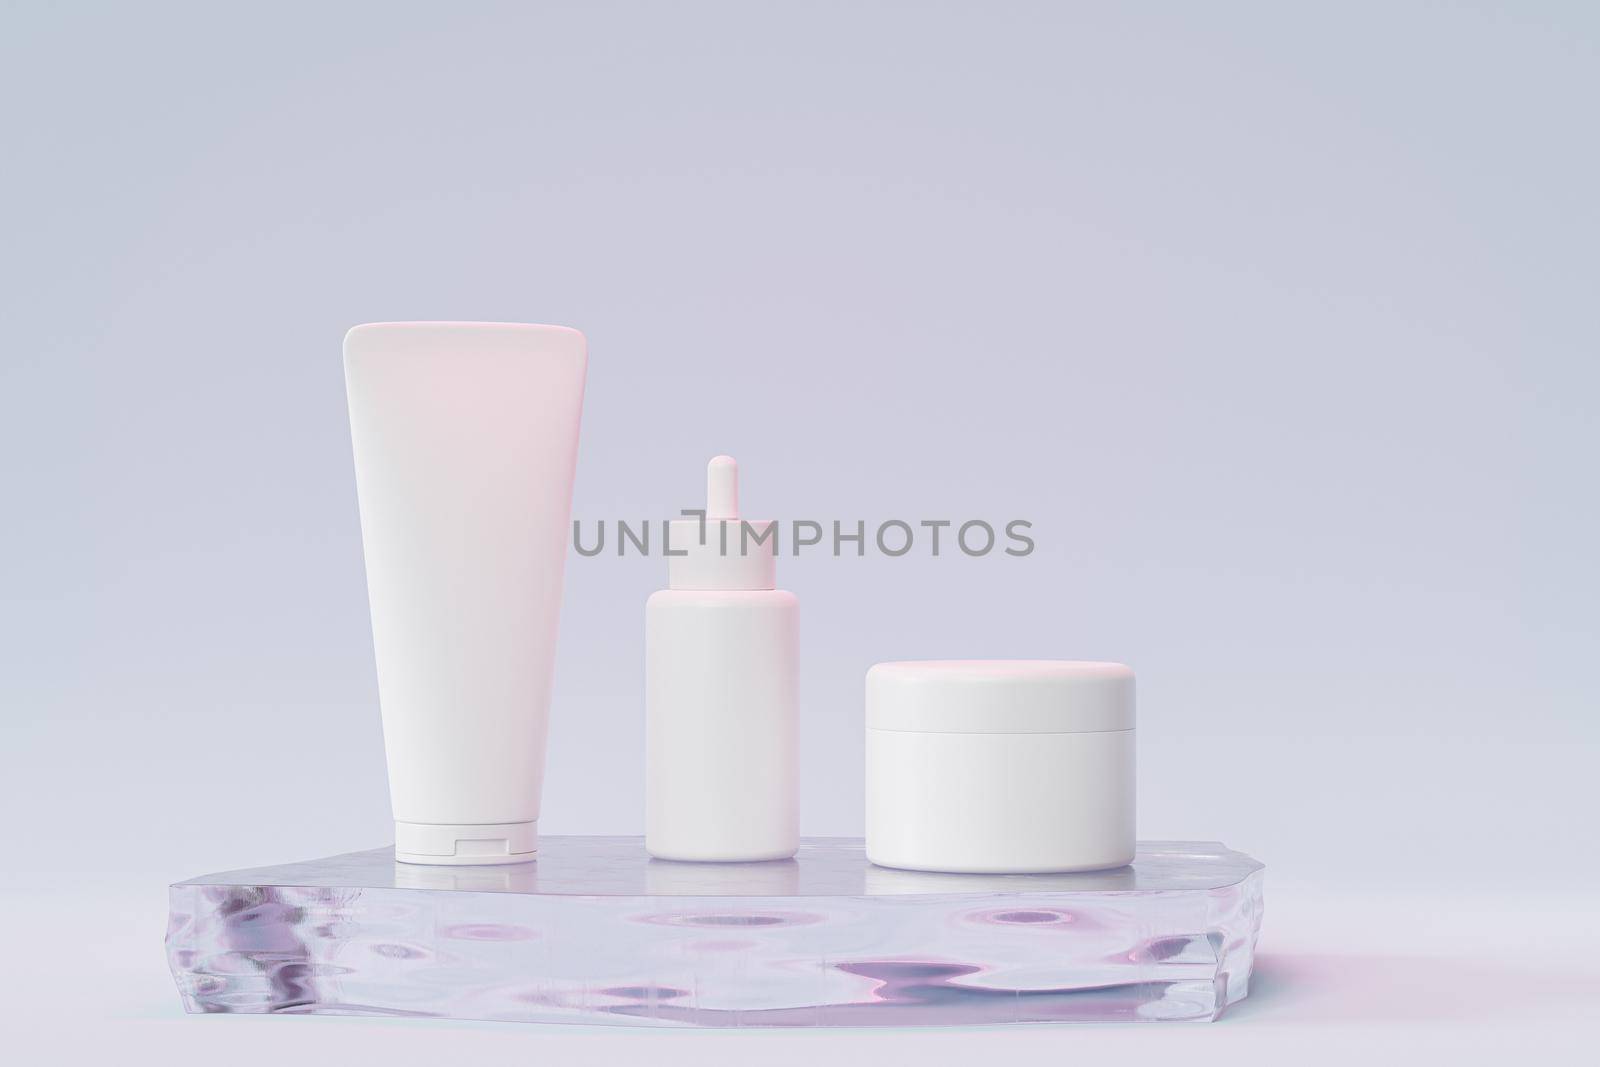 Mockup dropper bottle, lotion tube and cream jar for cosmetics products or advertising on glass podium, 3d illustration render